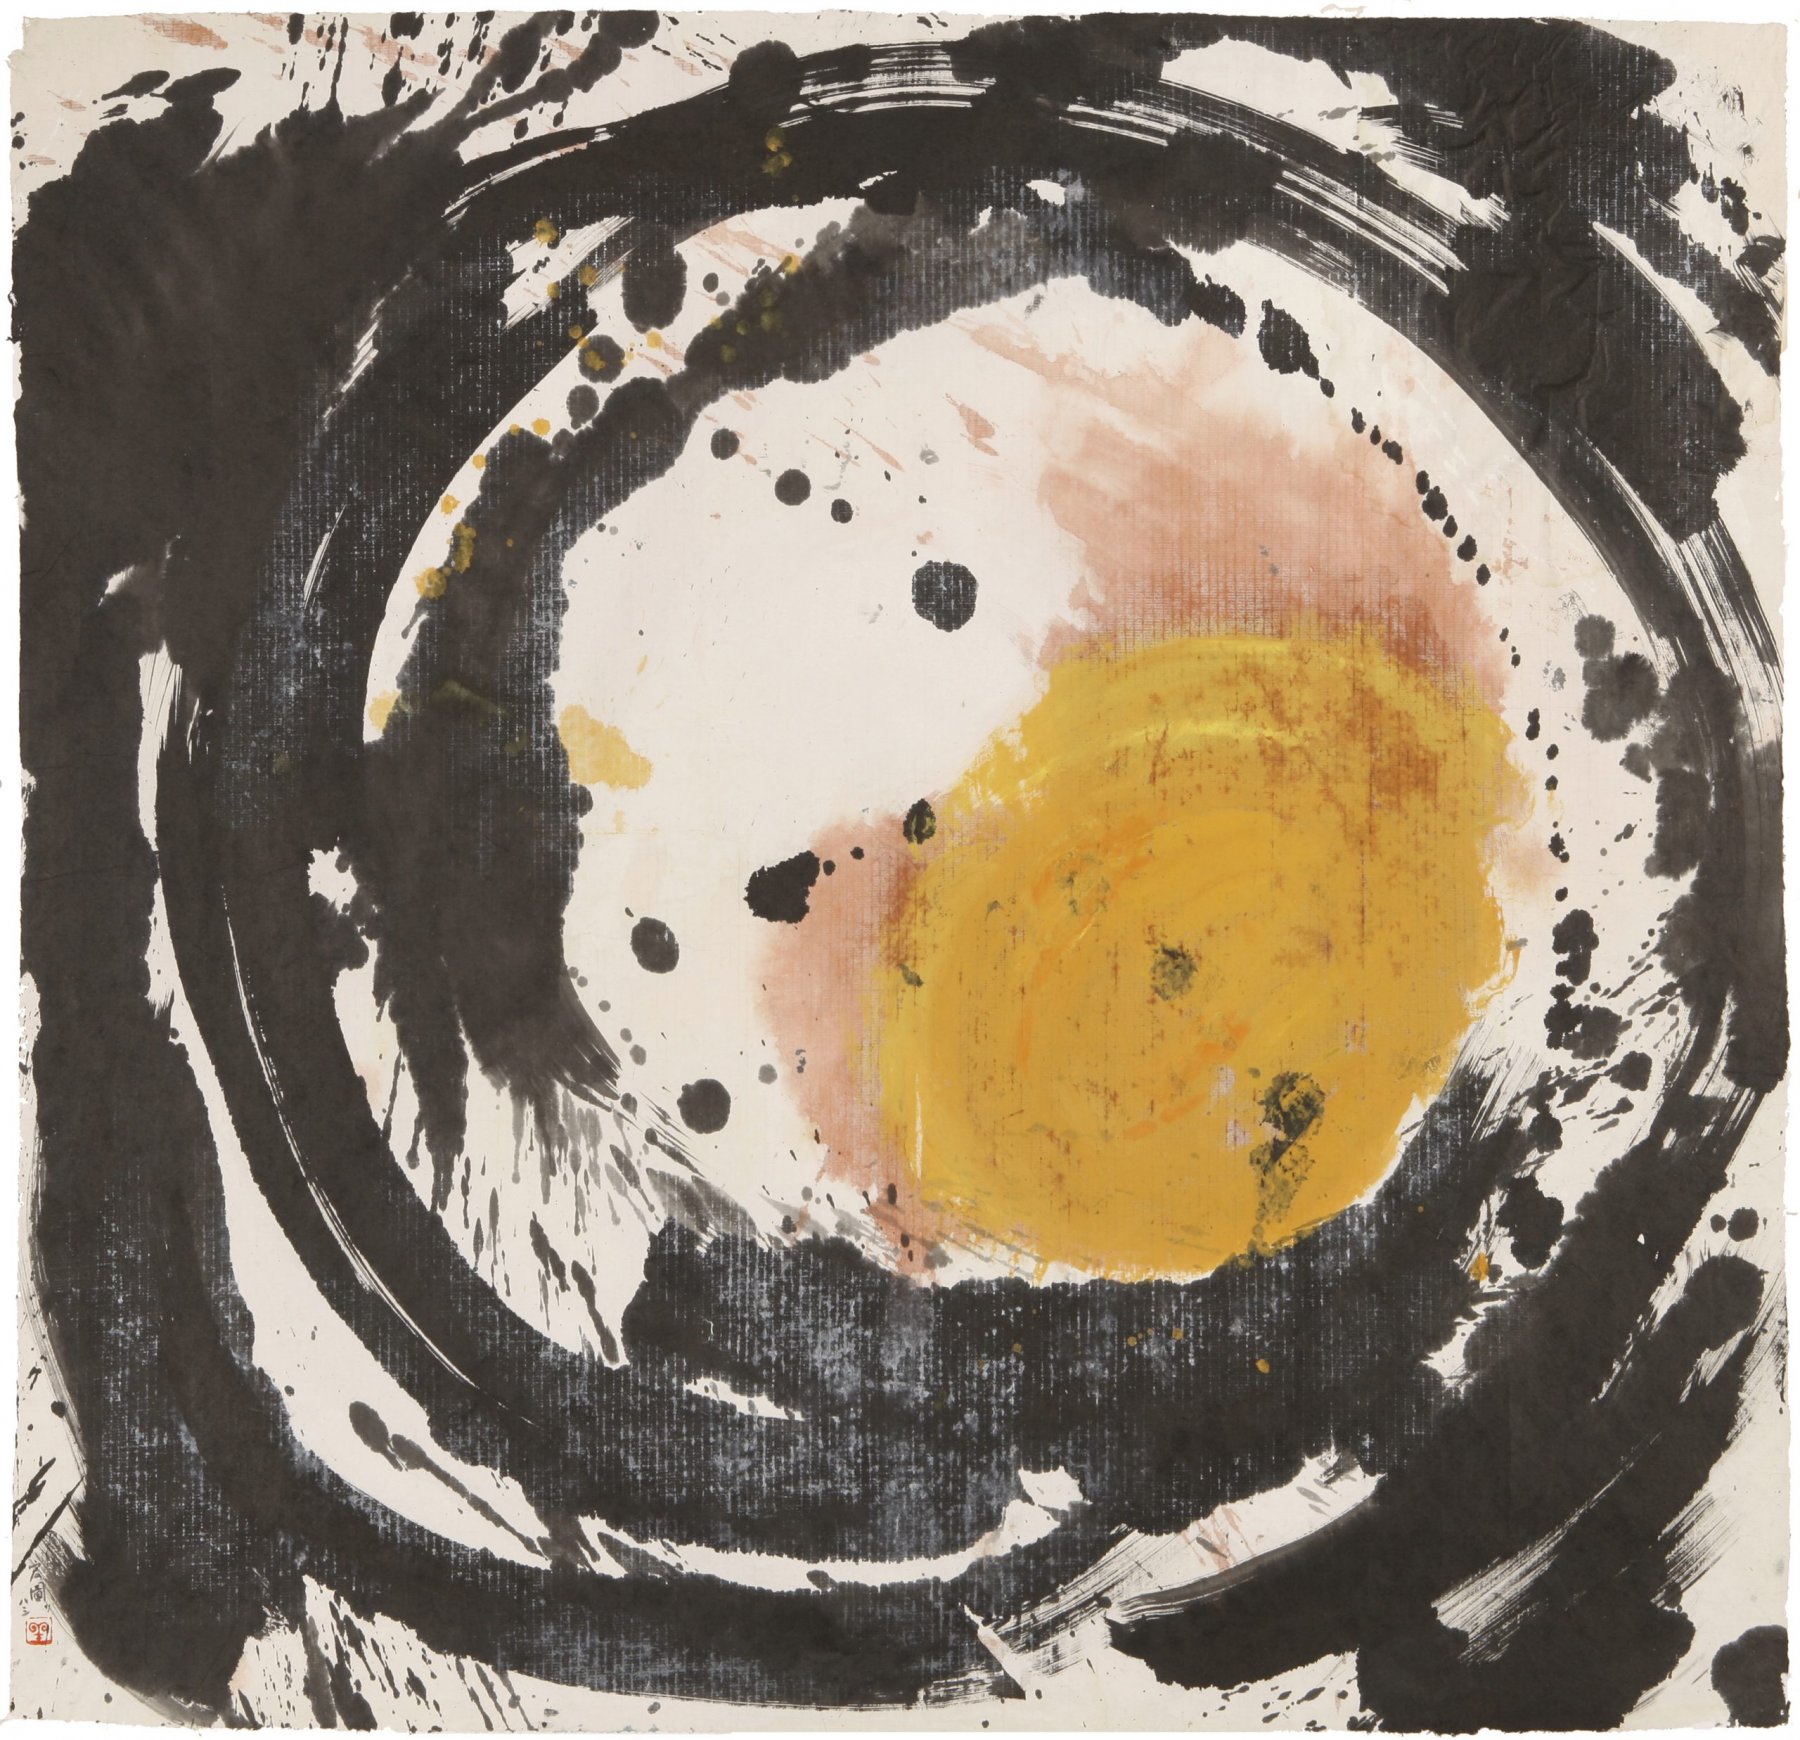 Zhang Hongtu, Story of One Circle, 1983, Ink, gouache and acrylic on rice paper, Courtesy of the artist